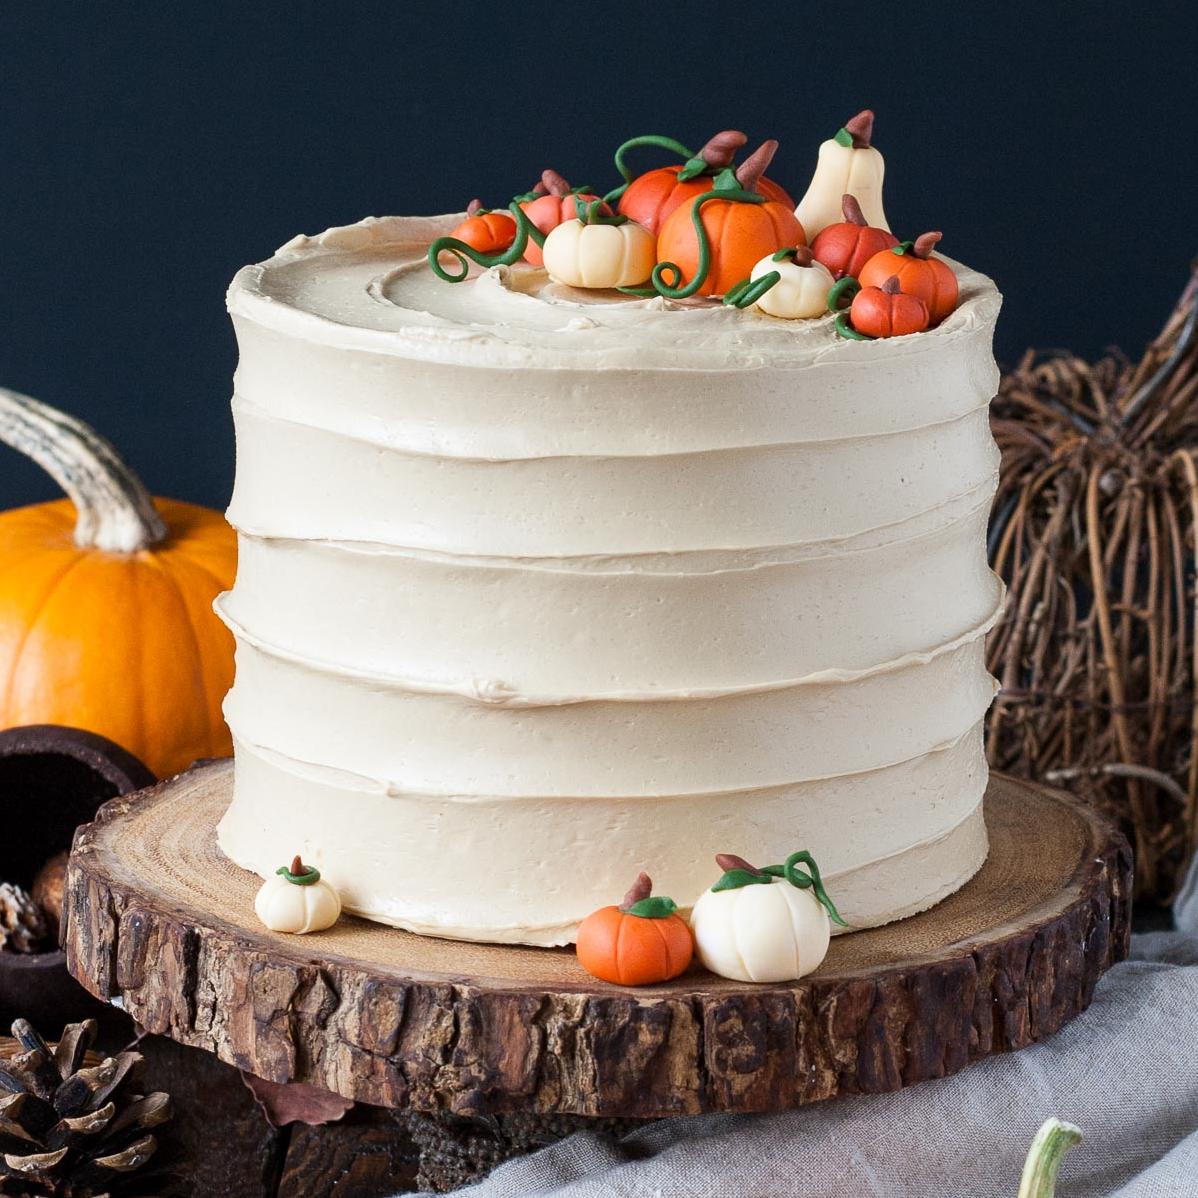  Indulge in the perfect cake for fall with a pumpkin spice latte twist.